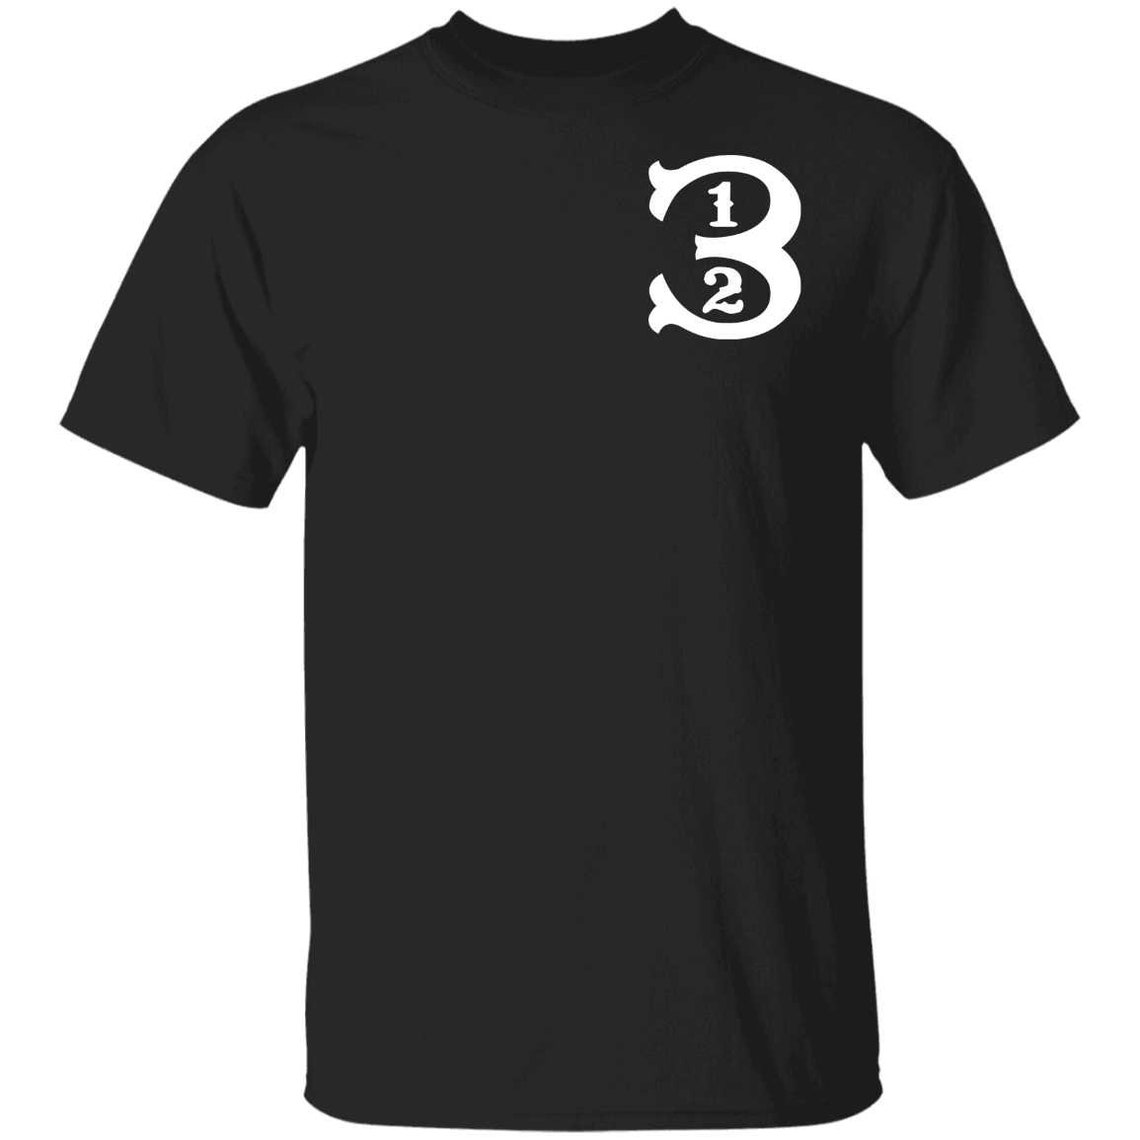 The 312 T-shirt - Etsy